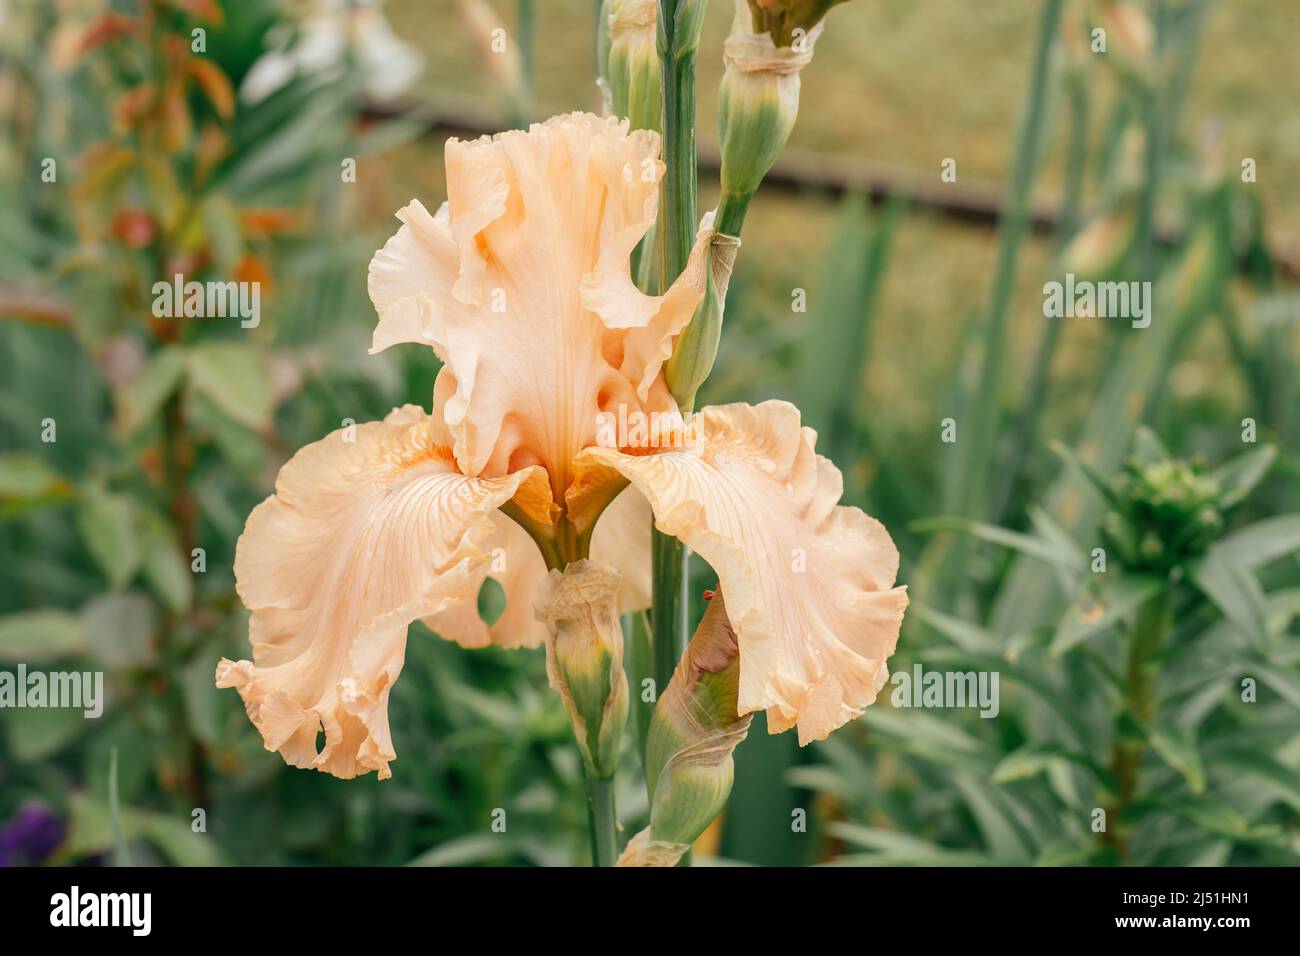 Gorgeous inflorescence of soft pink, peach flower of iris with wavy petals blossoming in garden. Nature and spring, gardening and horticulture concept Stock Photo